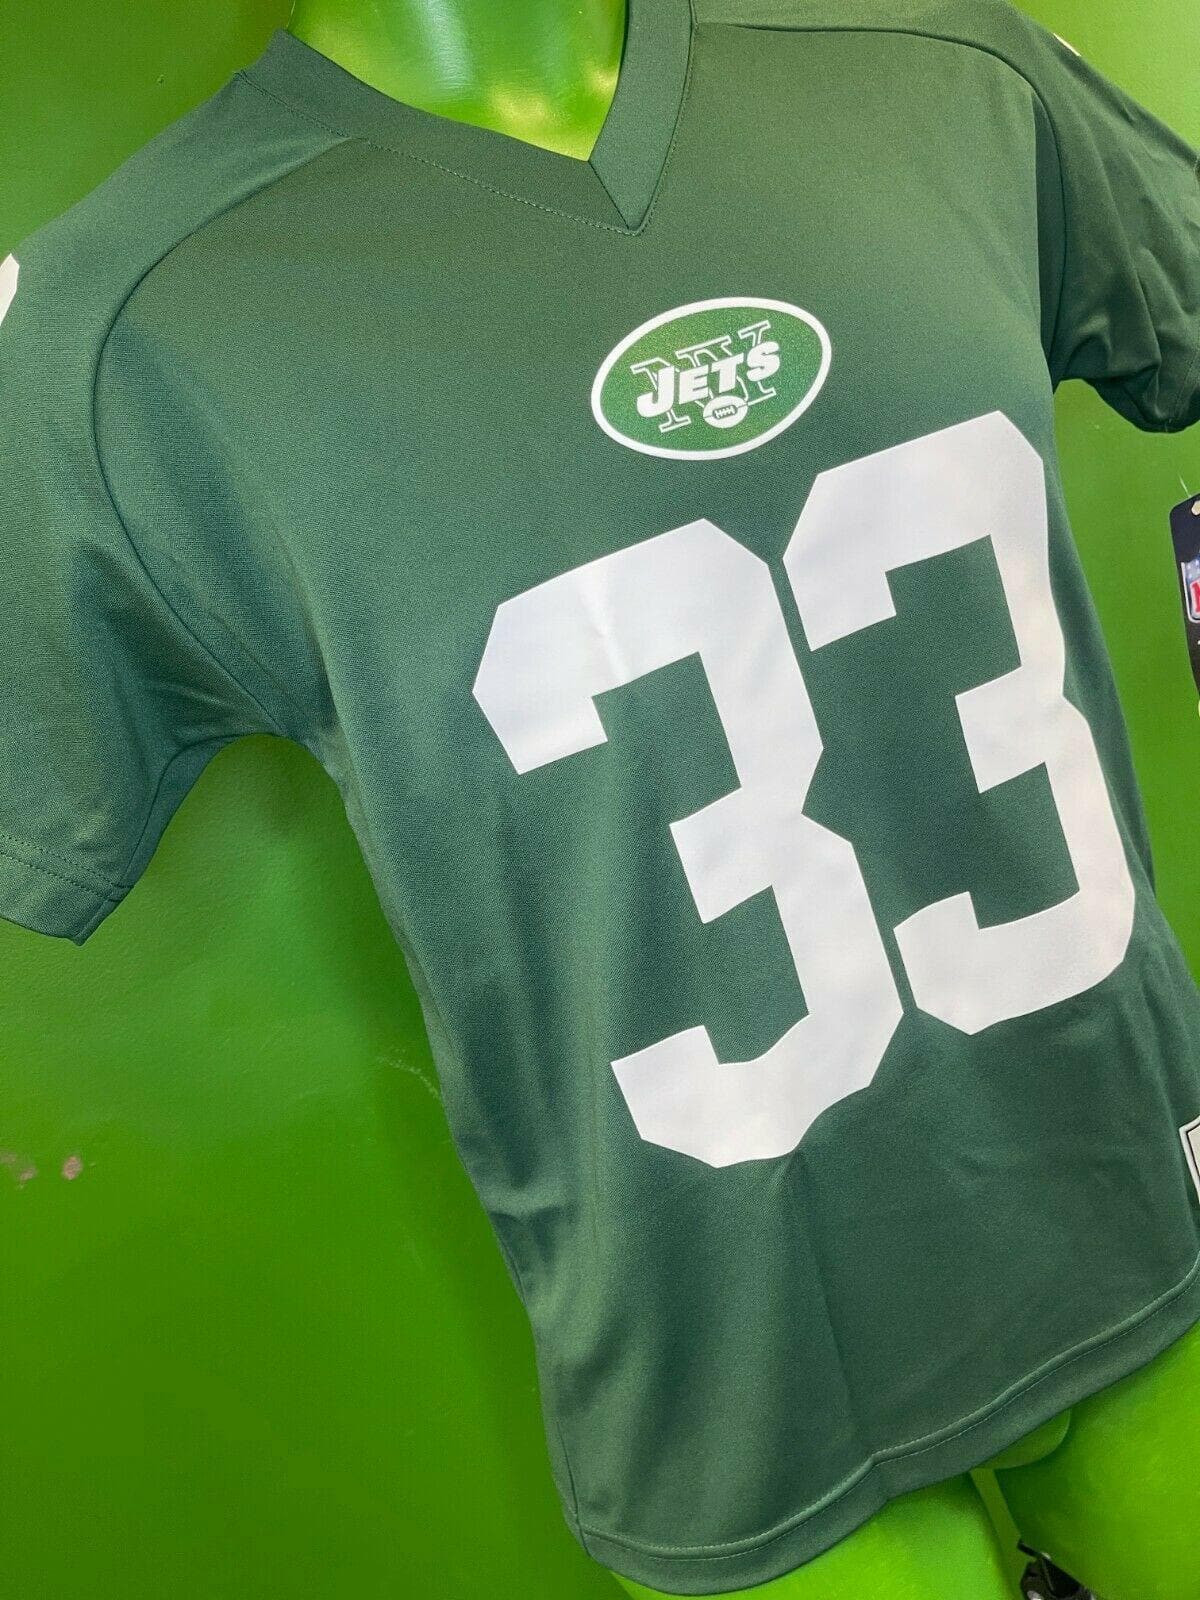 NFL New York Jets Jamal Adams #33 Jersey Top Youth Large 14-16 NWT